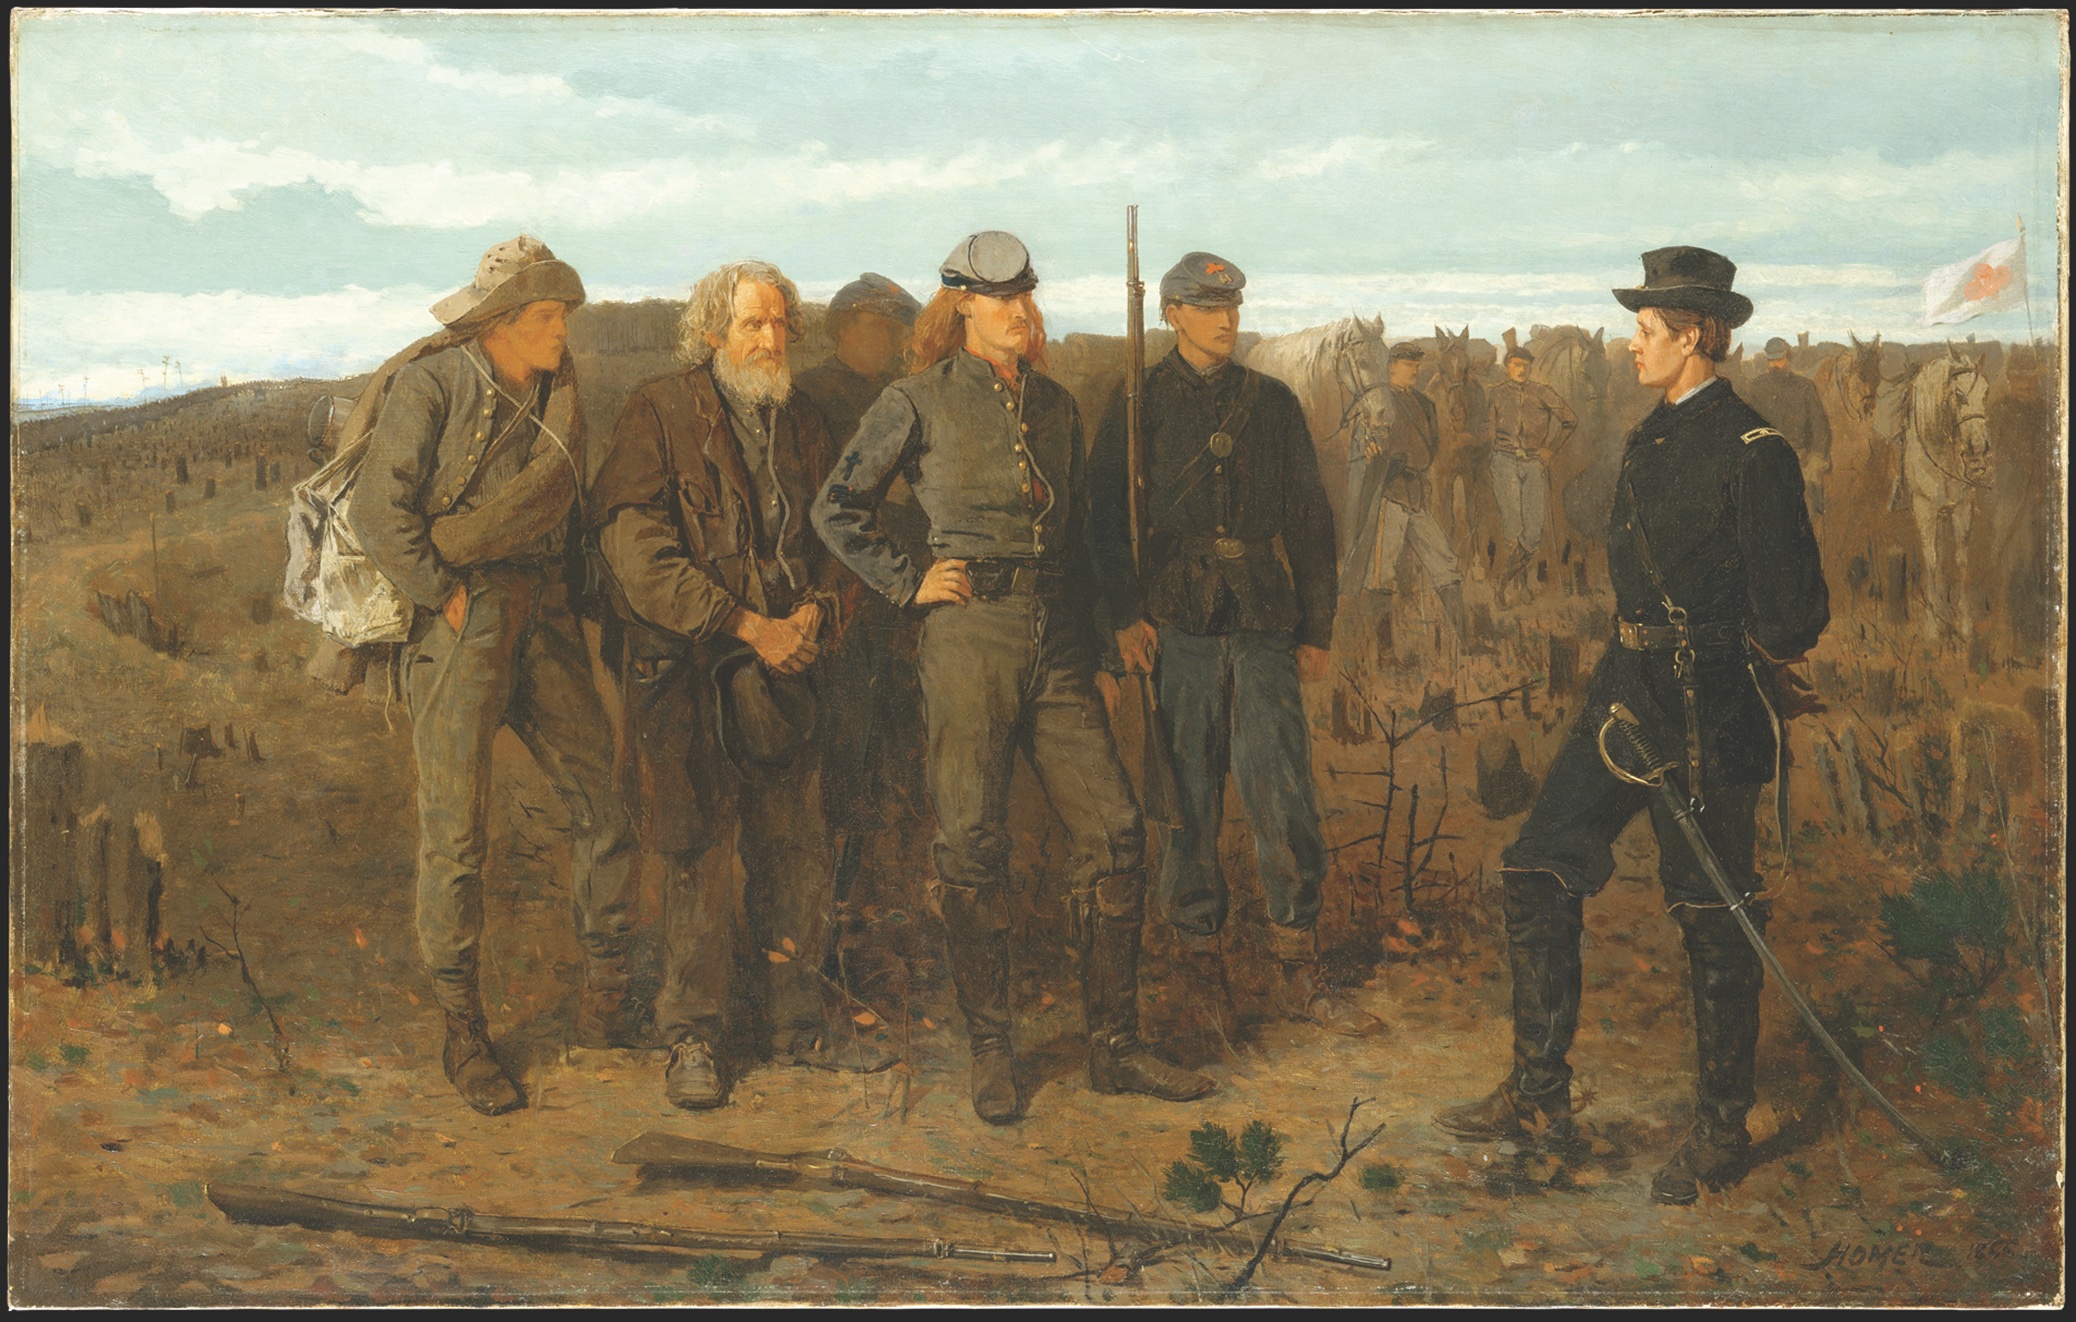 Winslow Homer’s painting, Prisoners From the Front, was completed in 1866. The three Confederate prisoners represented a young yeoman, an aged man pressed into service, and a long-haired firebrand eager for the war. (Metropolitan Museum of Art)